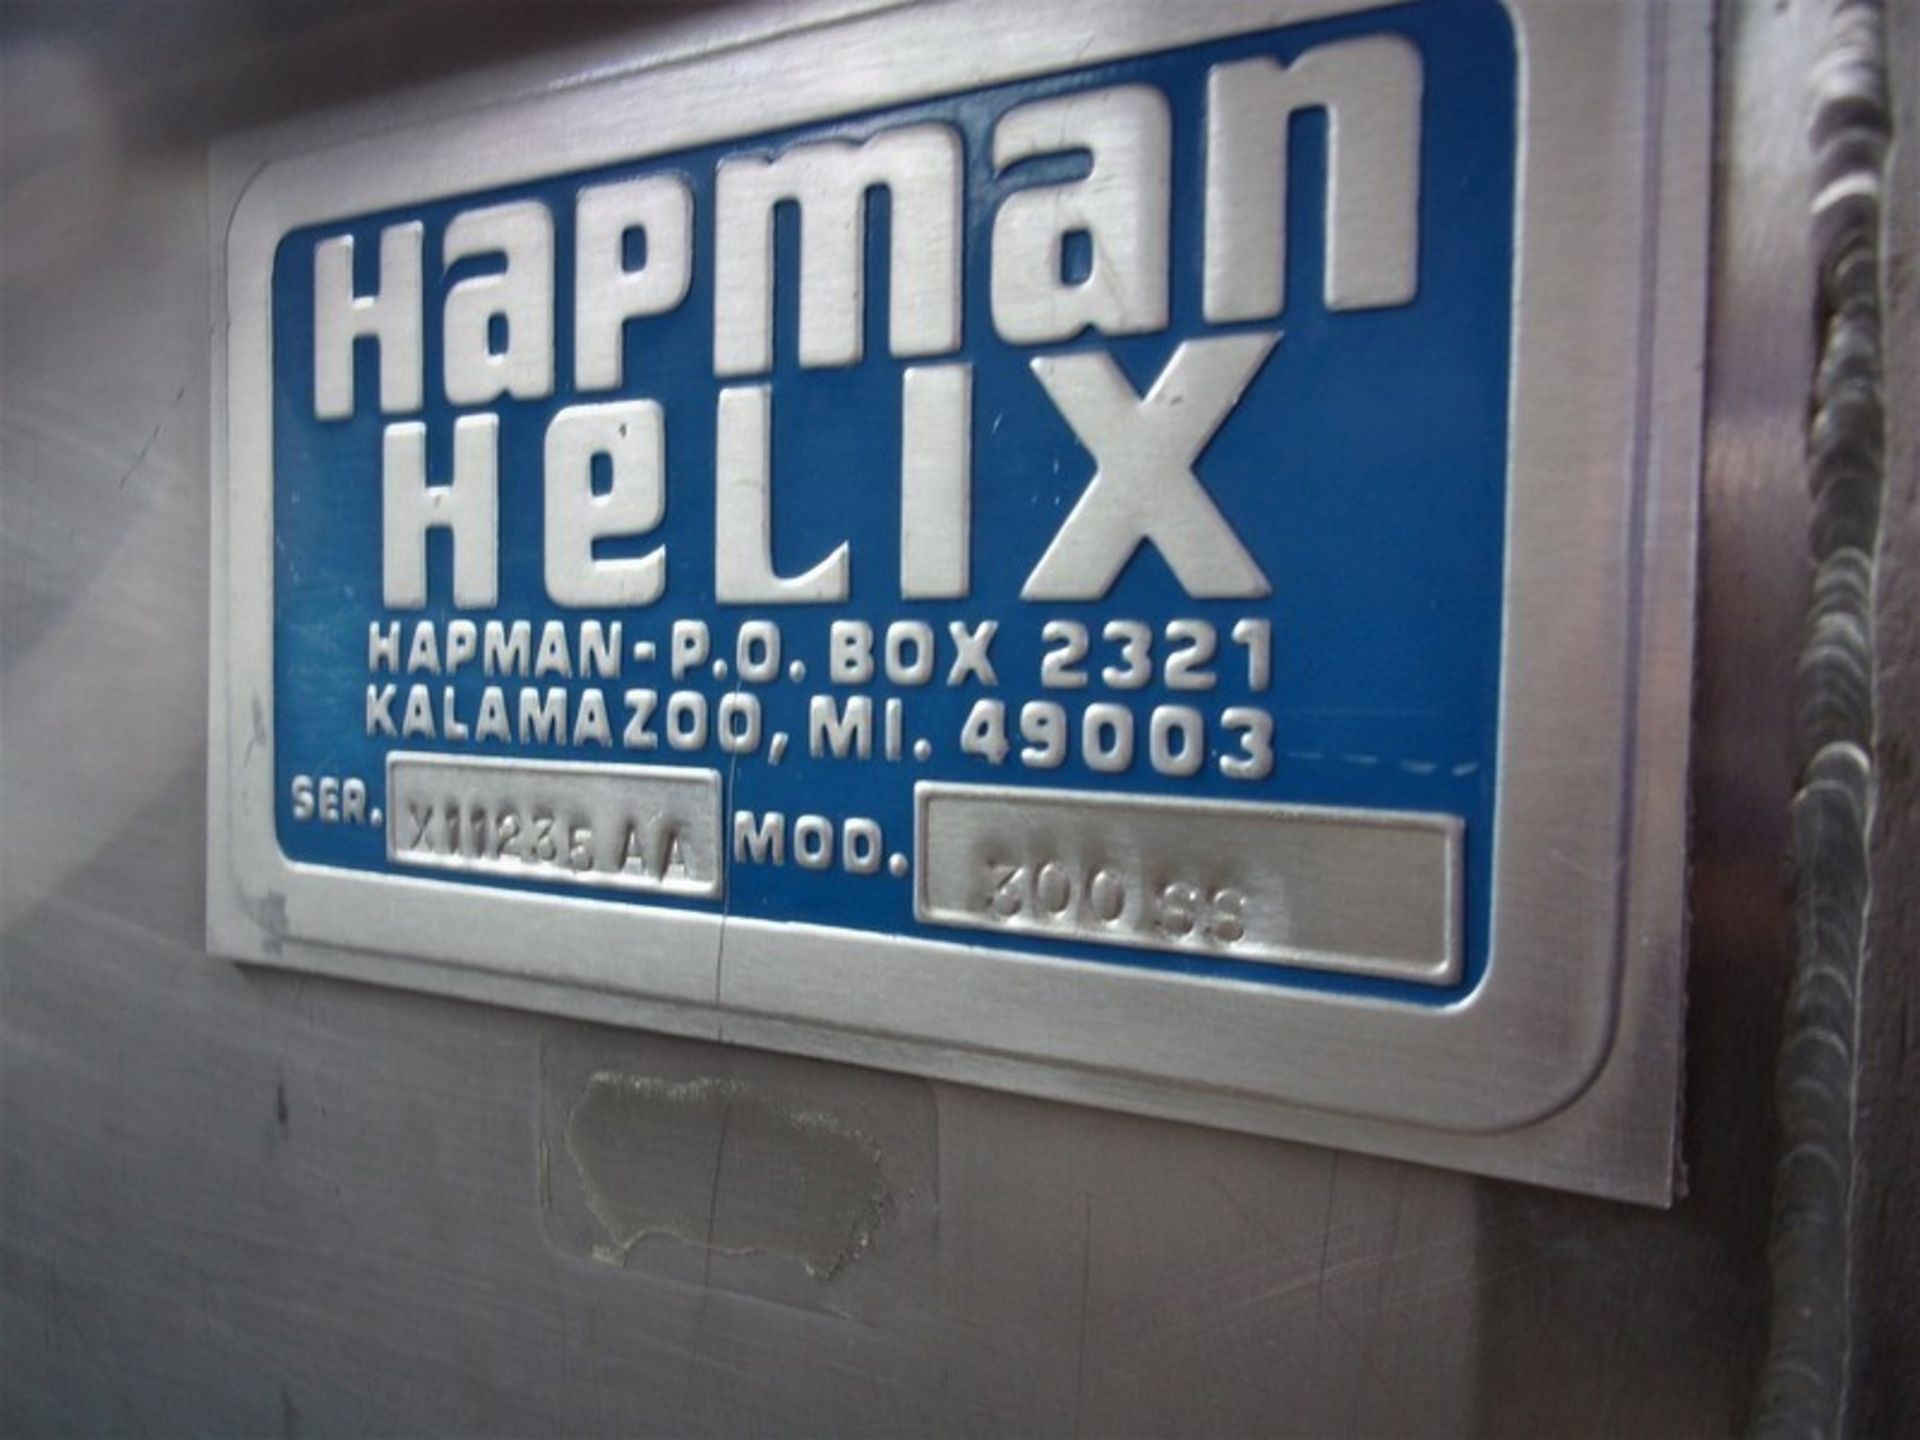 Hapman Helix S/S Hopper Conveyor Frame, Model 300 SS, S/N X11235 AA, Overall Dimensionsof the - Image 3 of 11